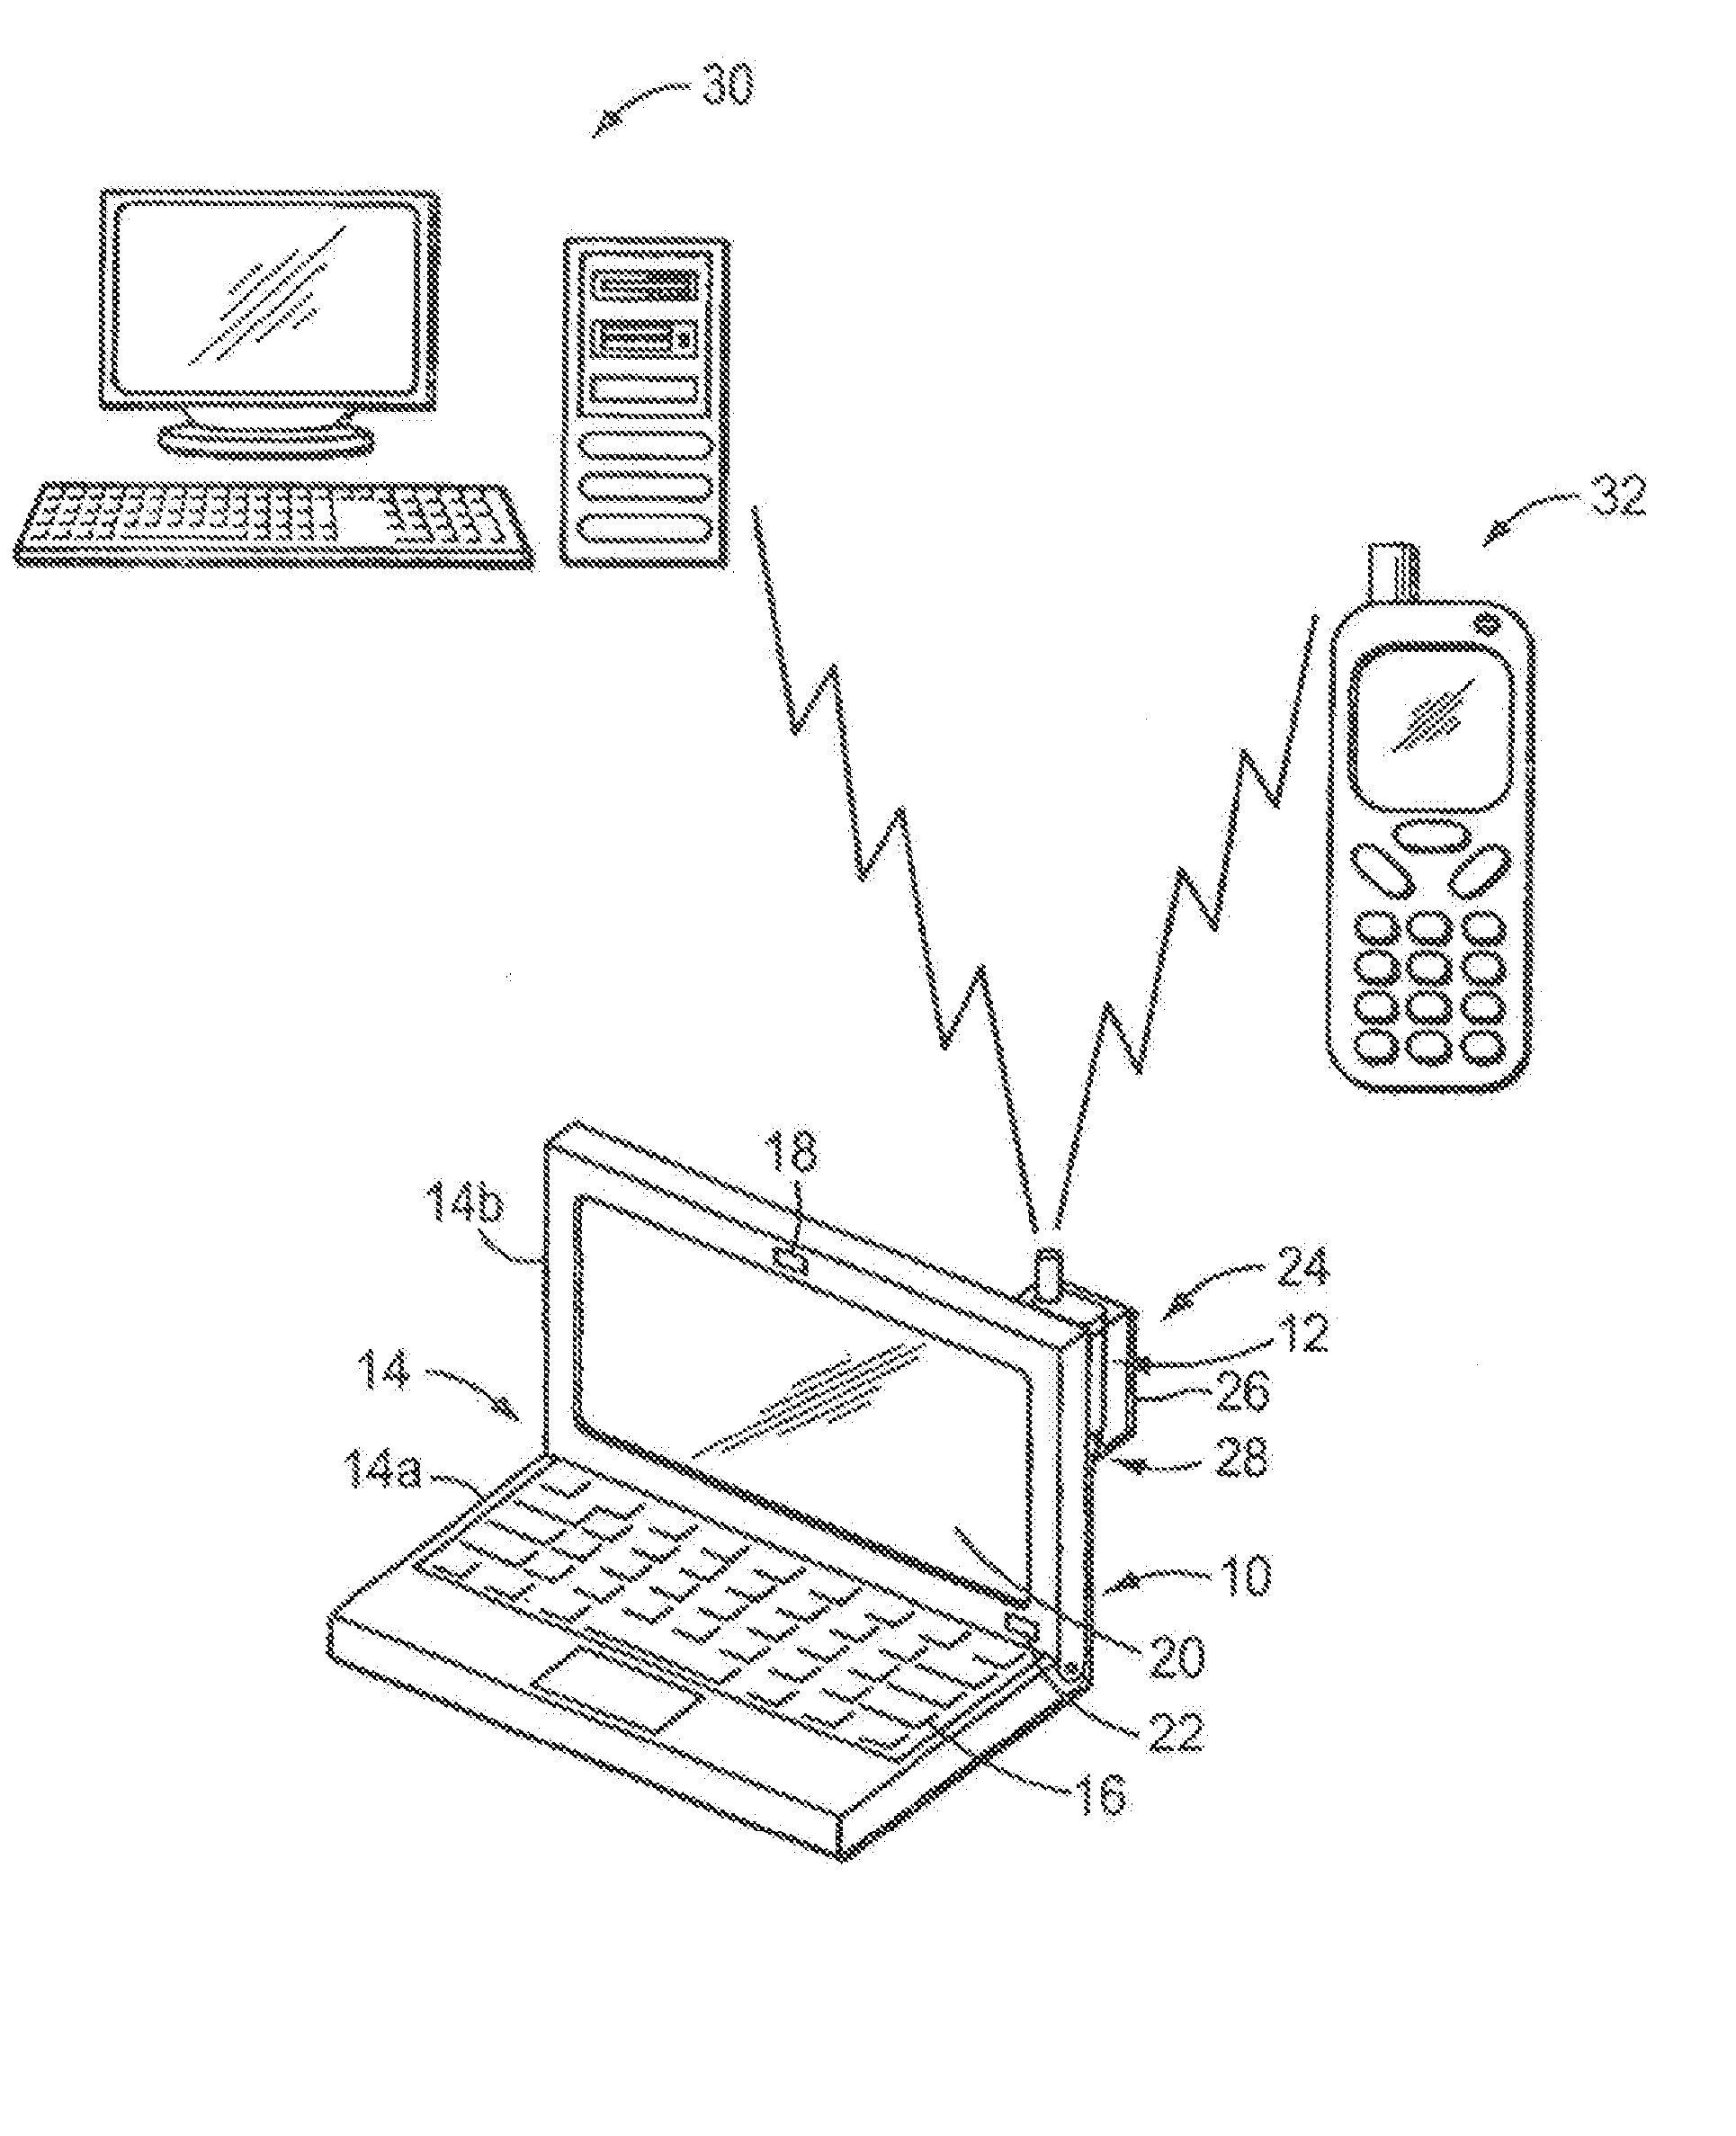 Expanded Display For Mobile Wireless Communication Device